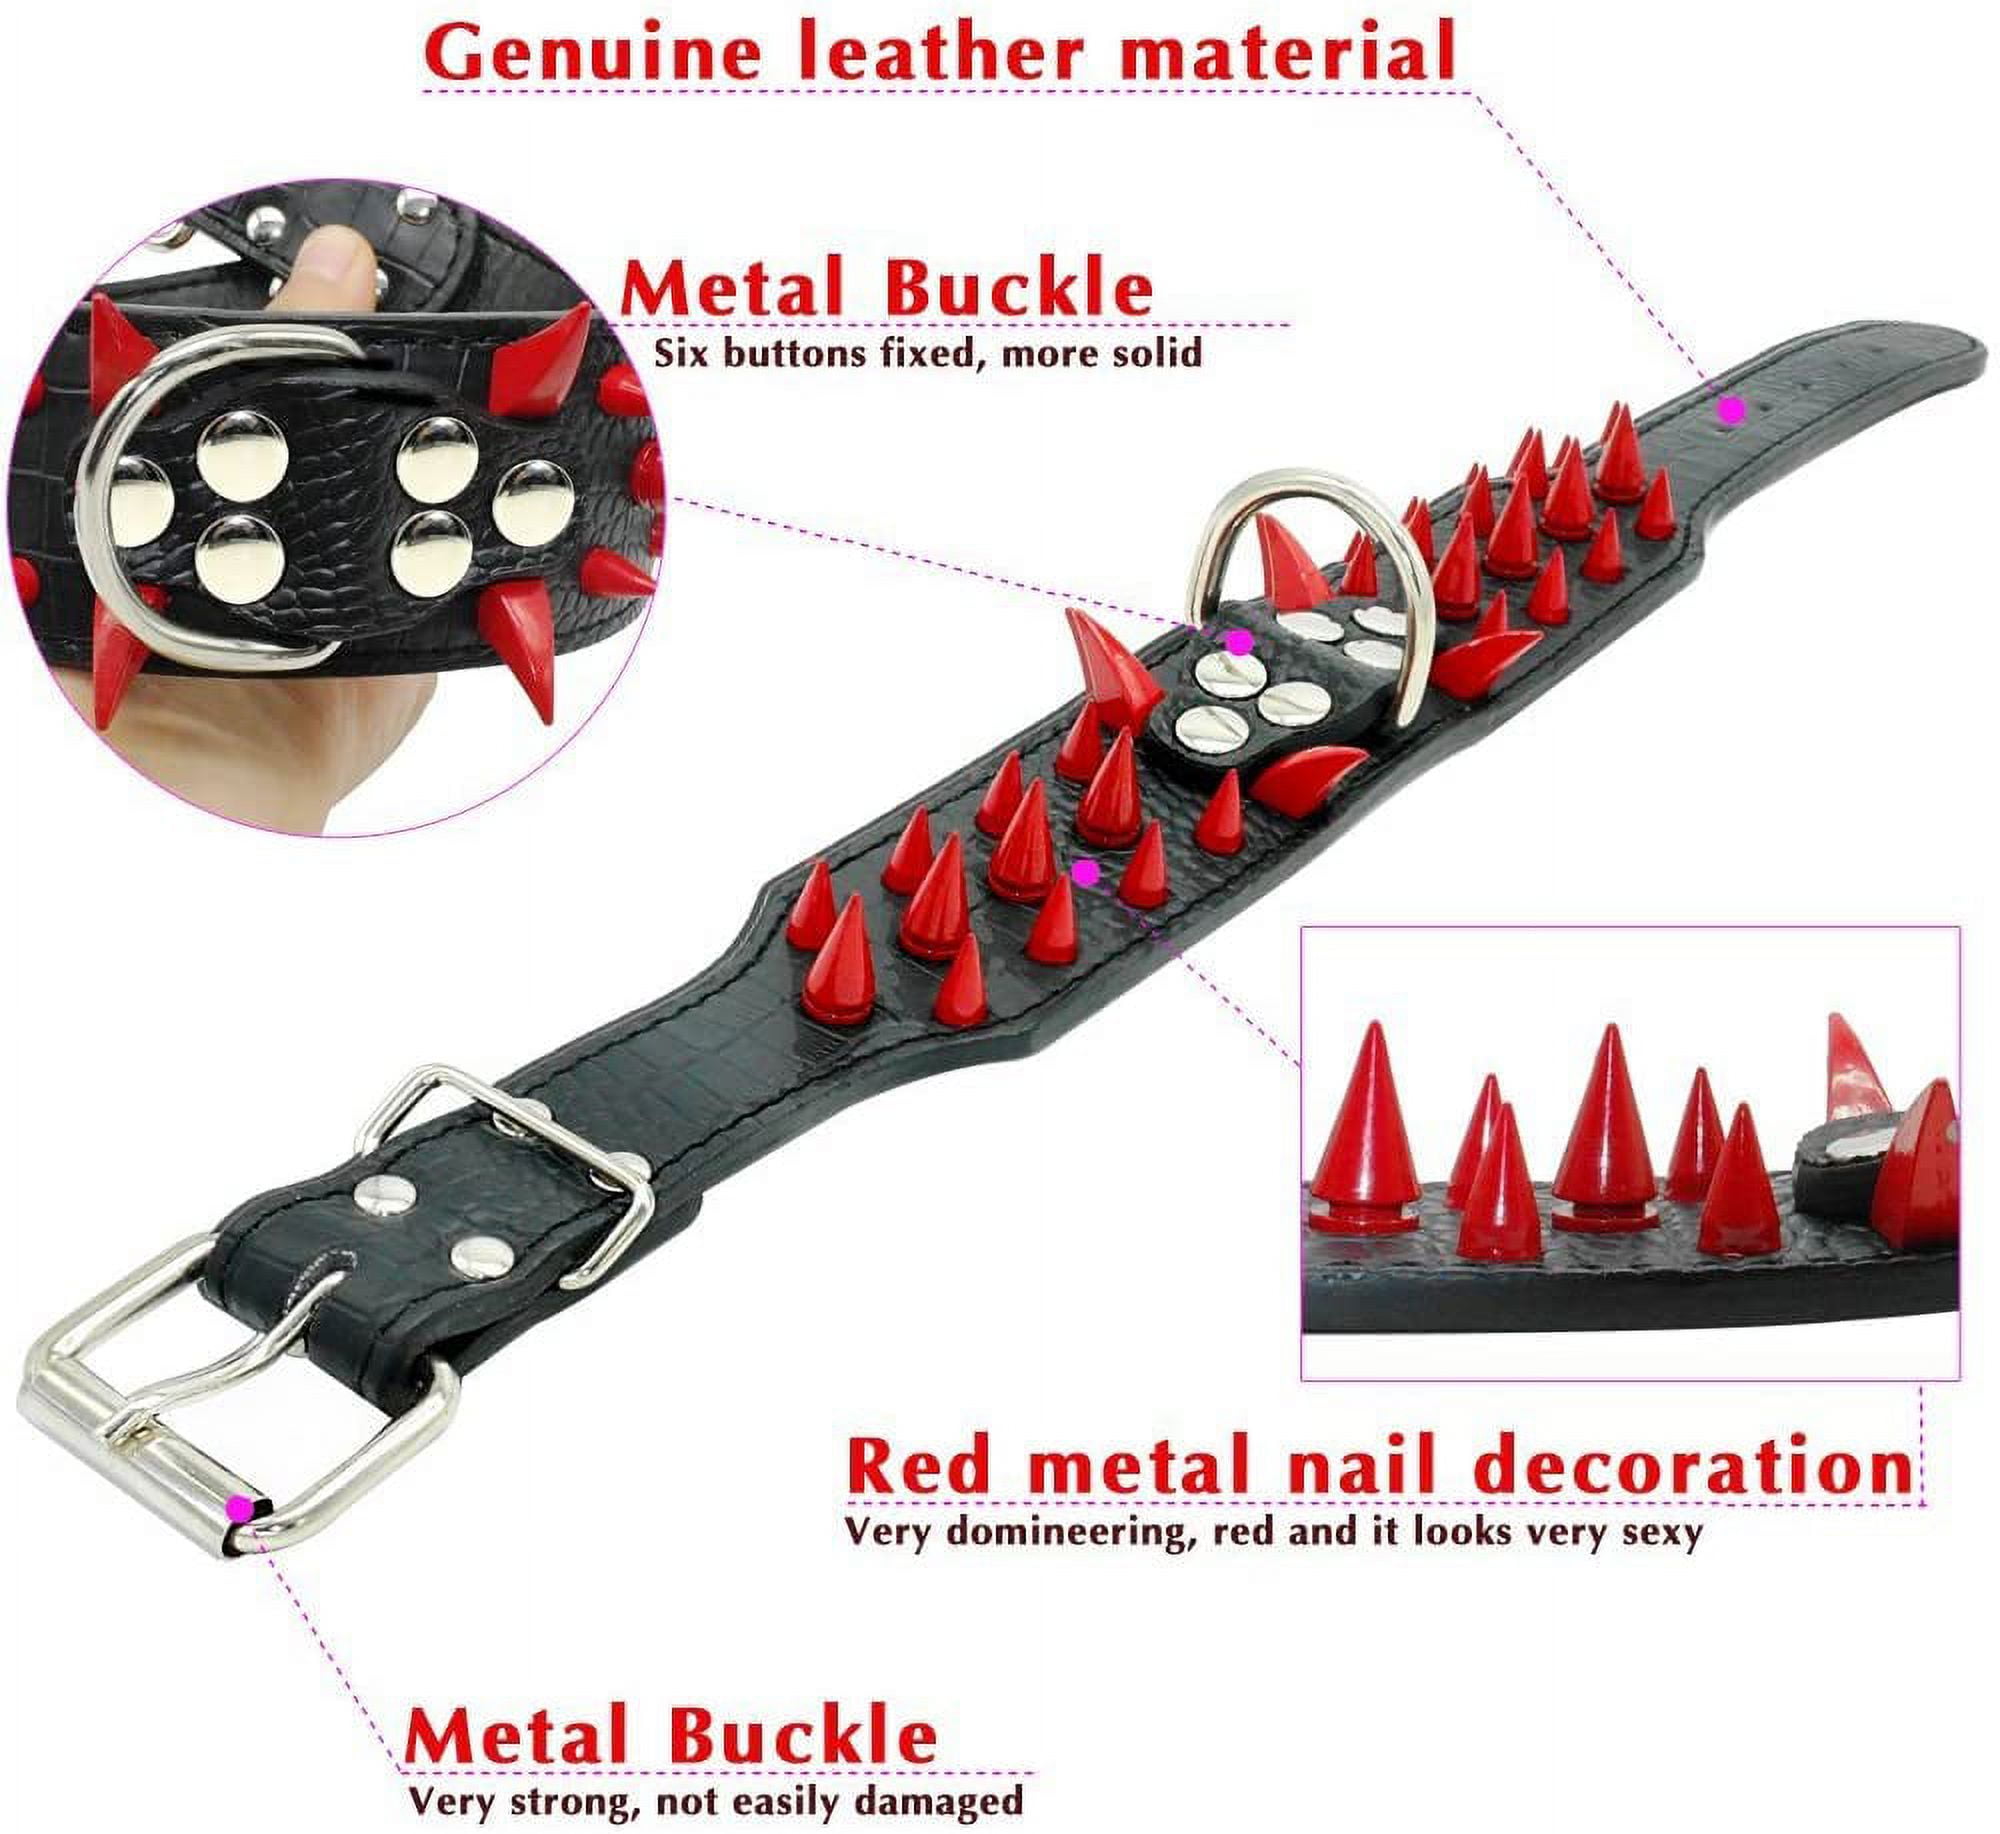 Pet Artist 2 Wide Luxury Genuine Leather Spiked Studded Dog Collars for Medium & Large Dogs,Red,M,Neck for 17-20